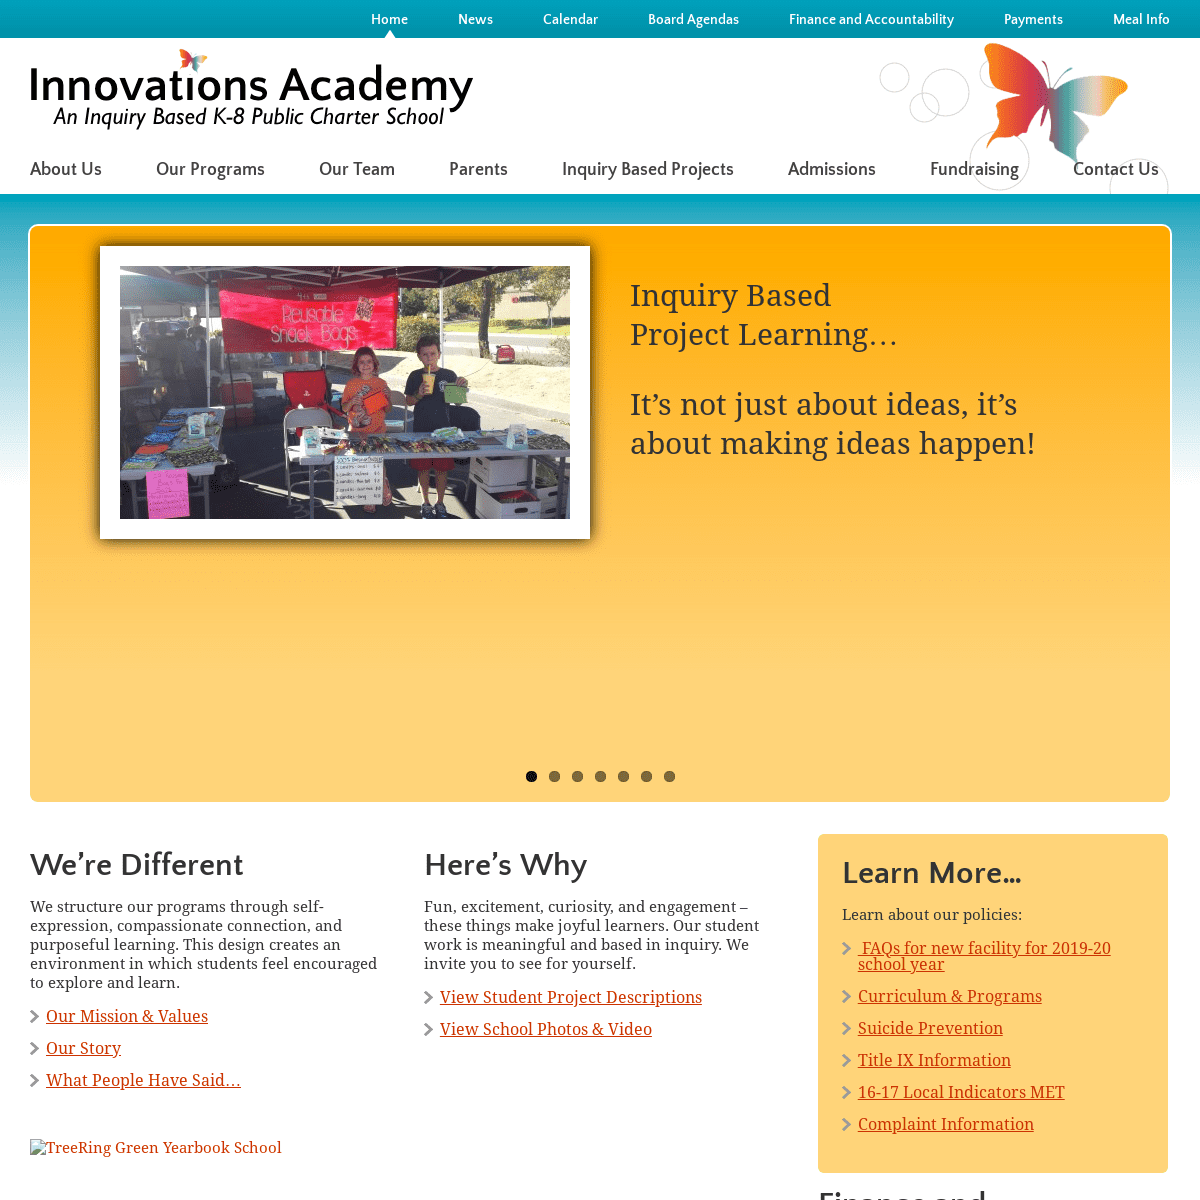 A complete backup of innovationsacademy.org